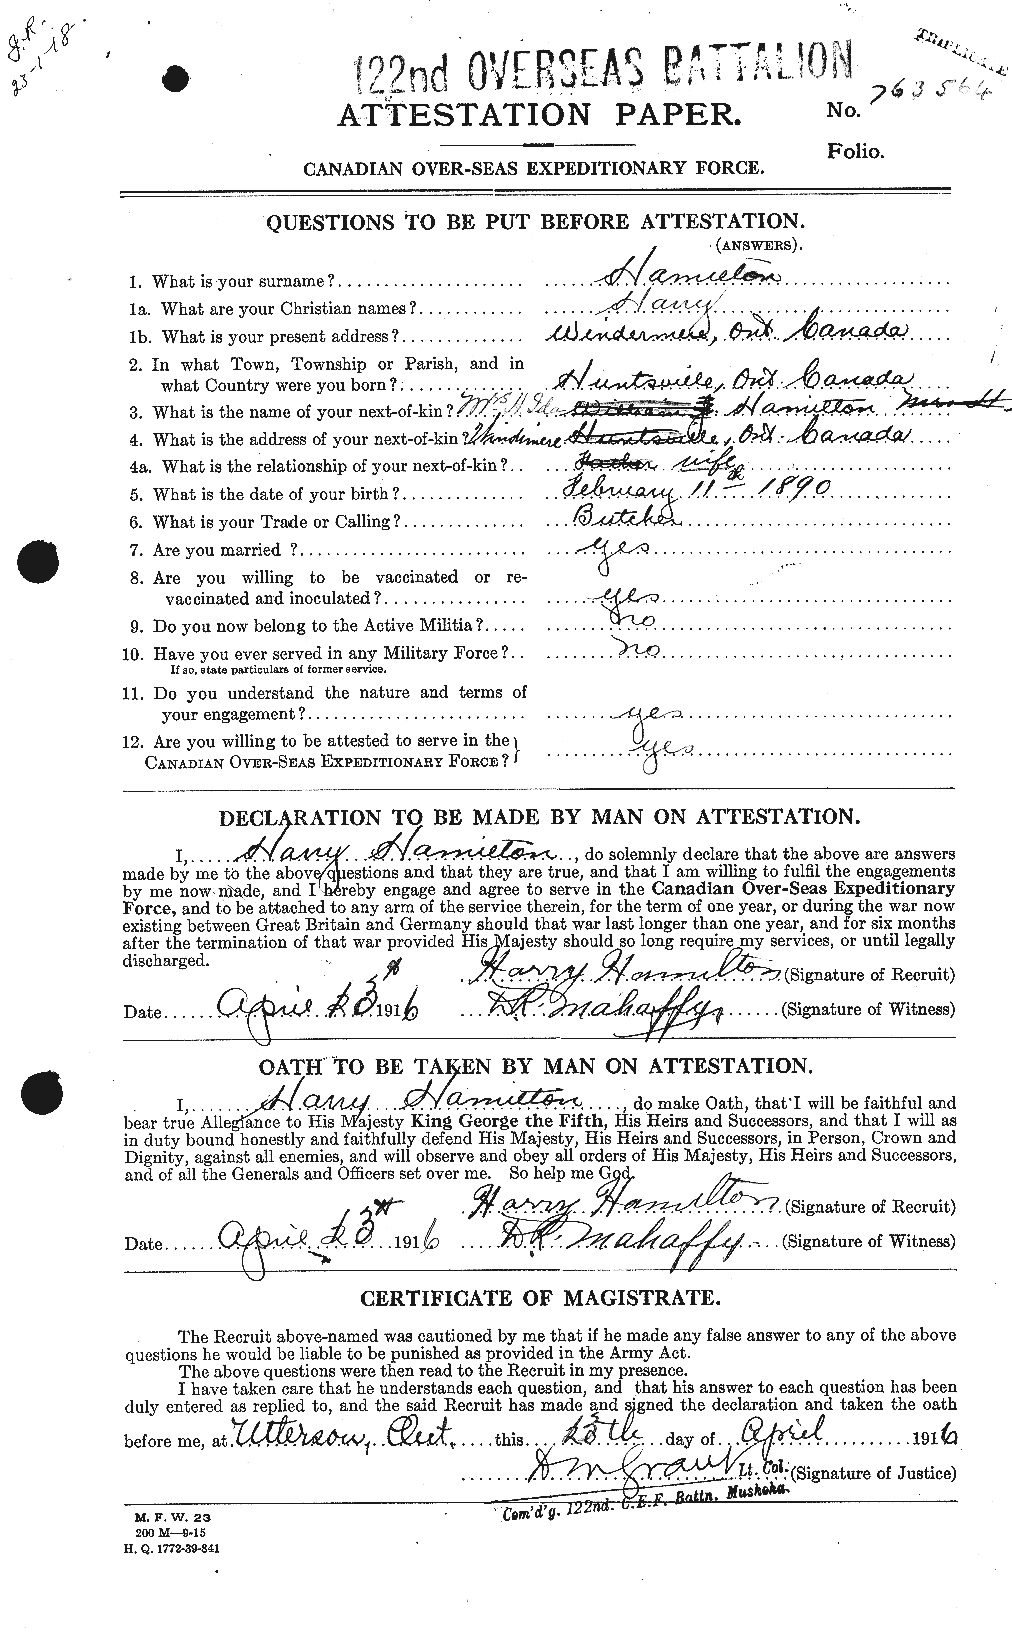 Personnel Records of the First World War - CEF 372504a